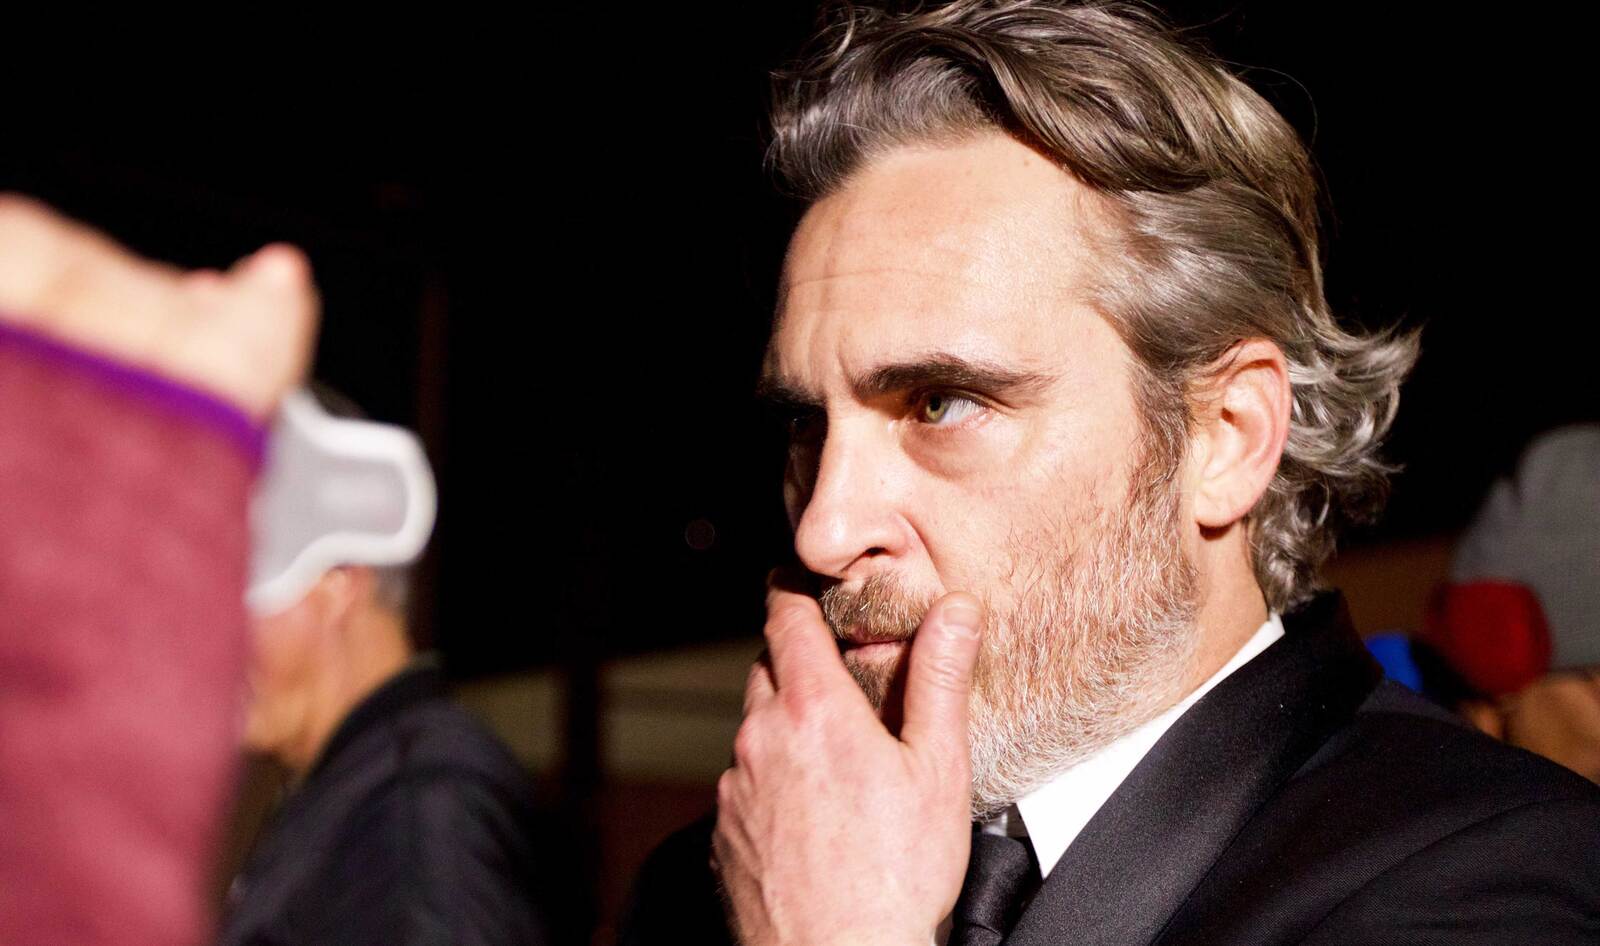 Joaquin Phoenix, Robert De Niro, and 200 Other Thought Leaders Refuse to “Return to Normal,” Urge Systemic Change to Preserve the Planet